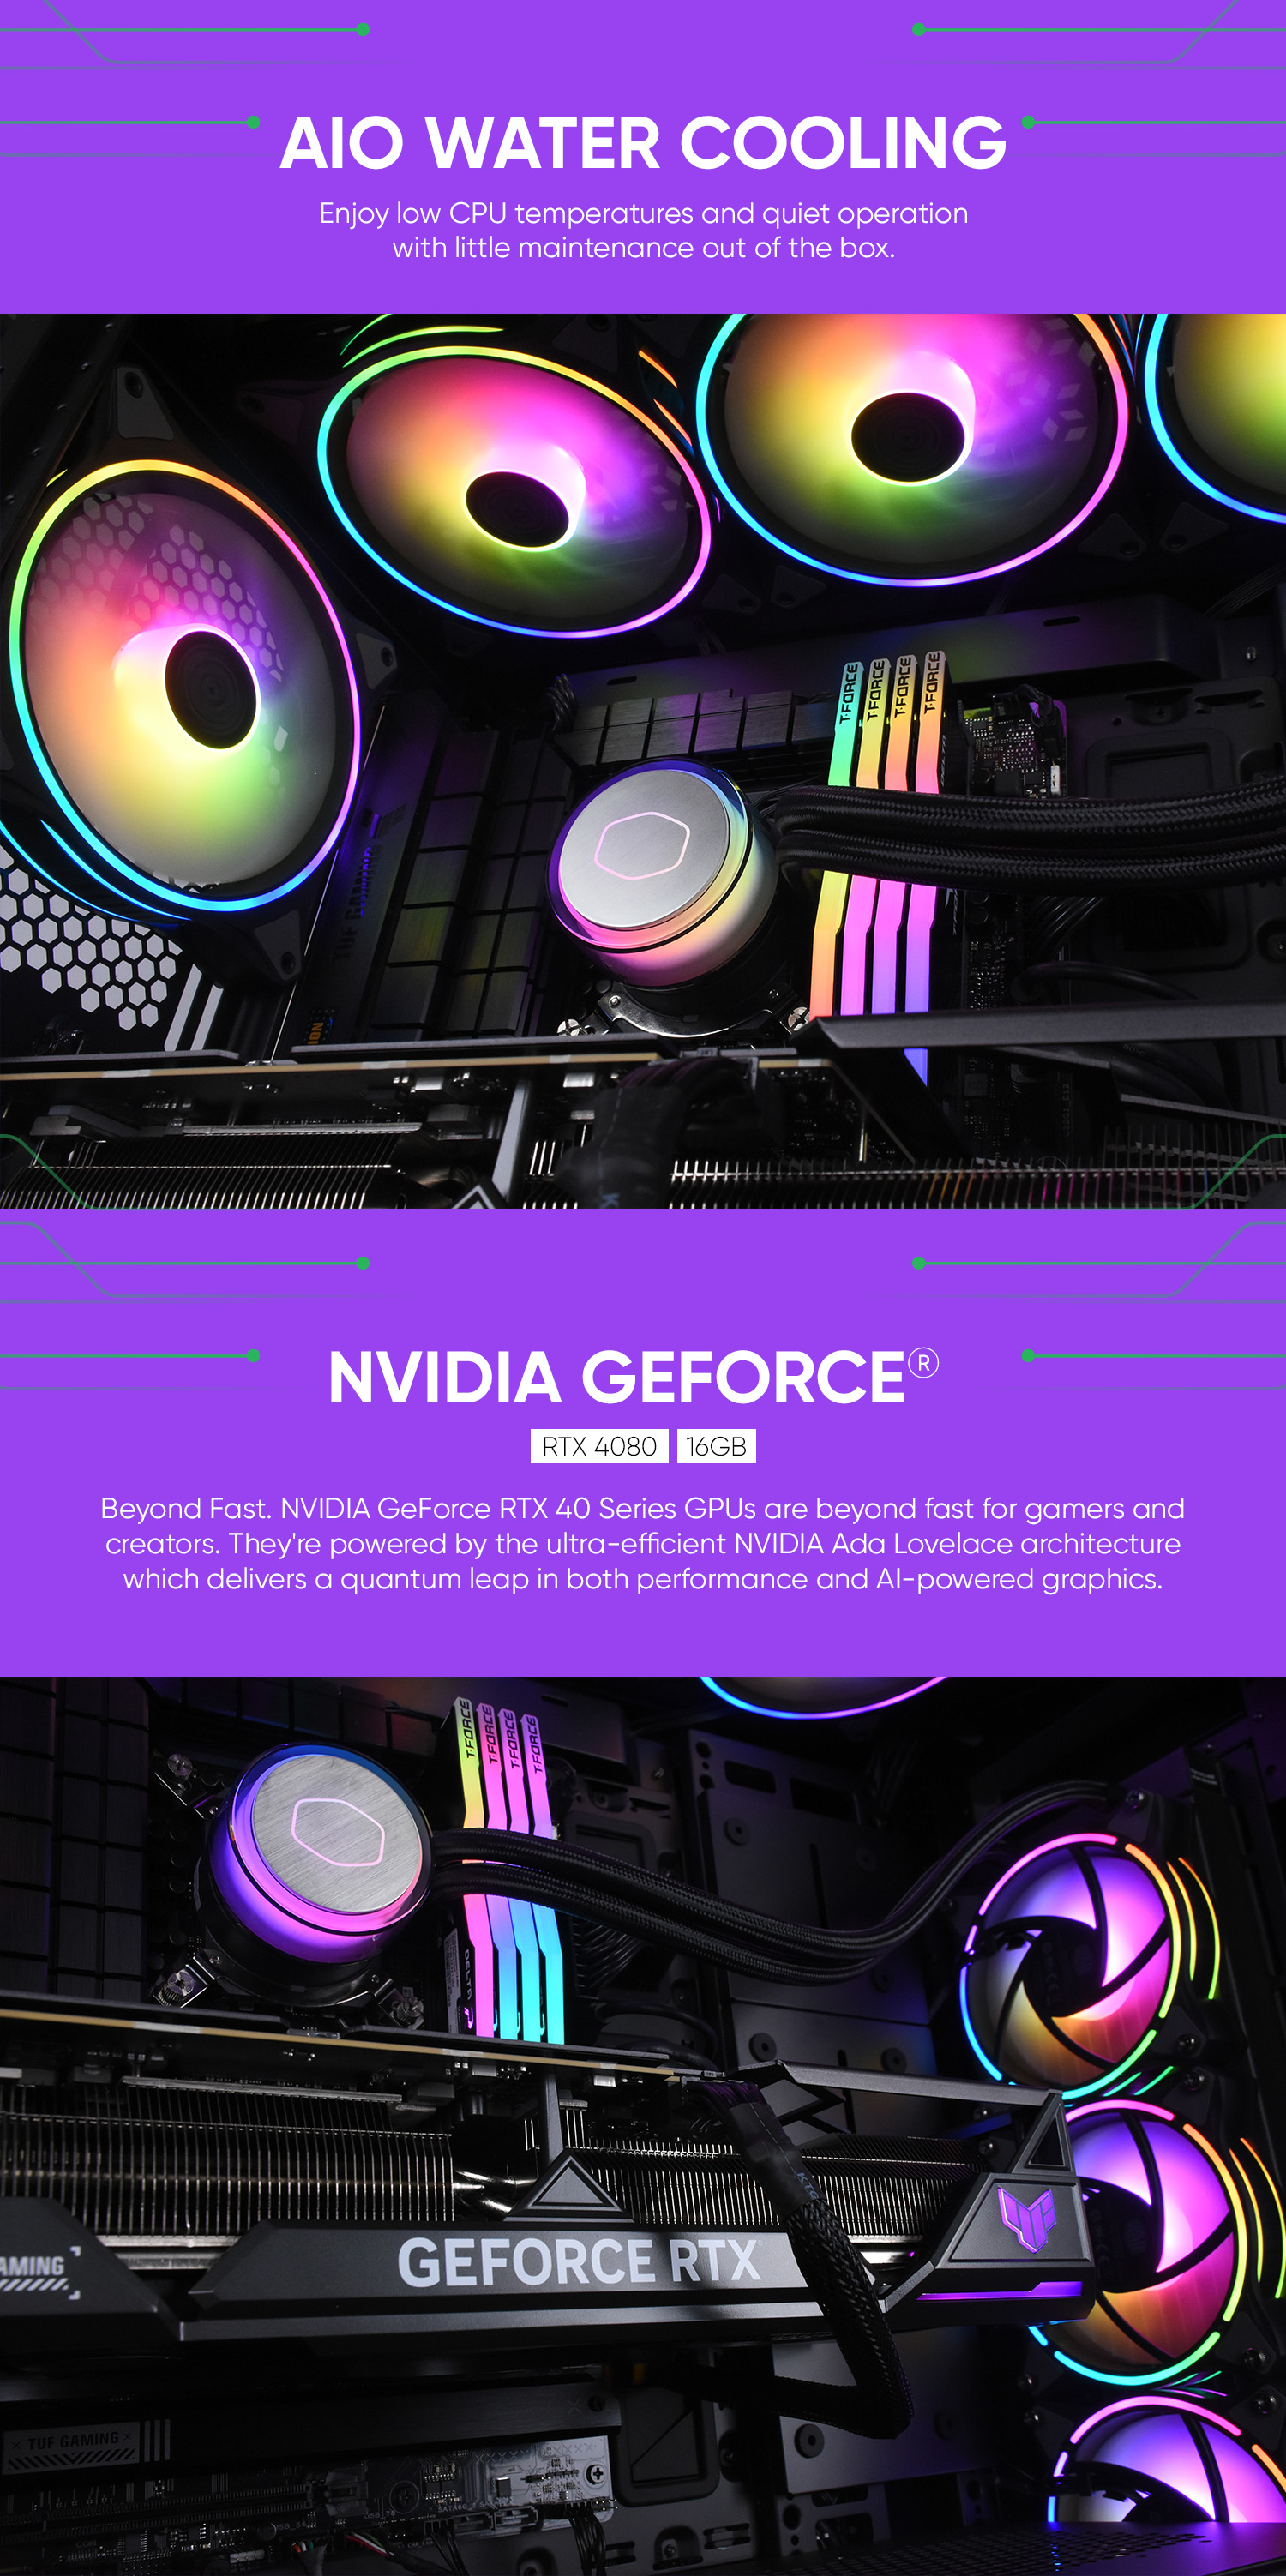 Gaming-PCs-G7-Core-Intel-13th-Gen-i7-GeForce-RTX-4080-Gaming-PC-DreamHack-Edition-4